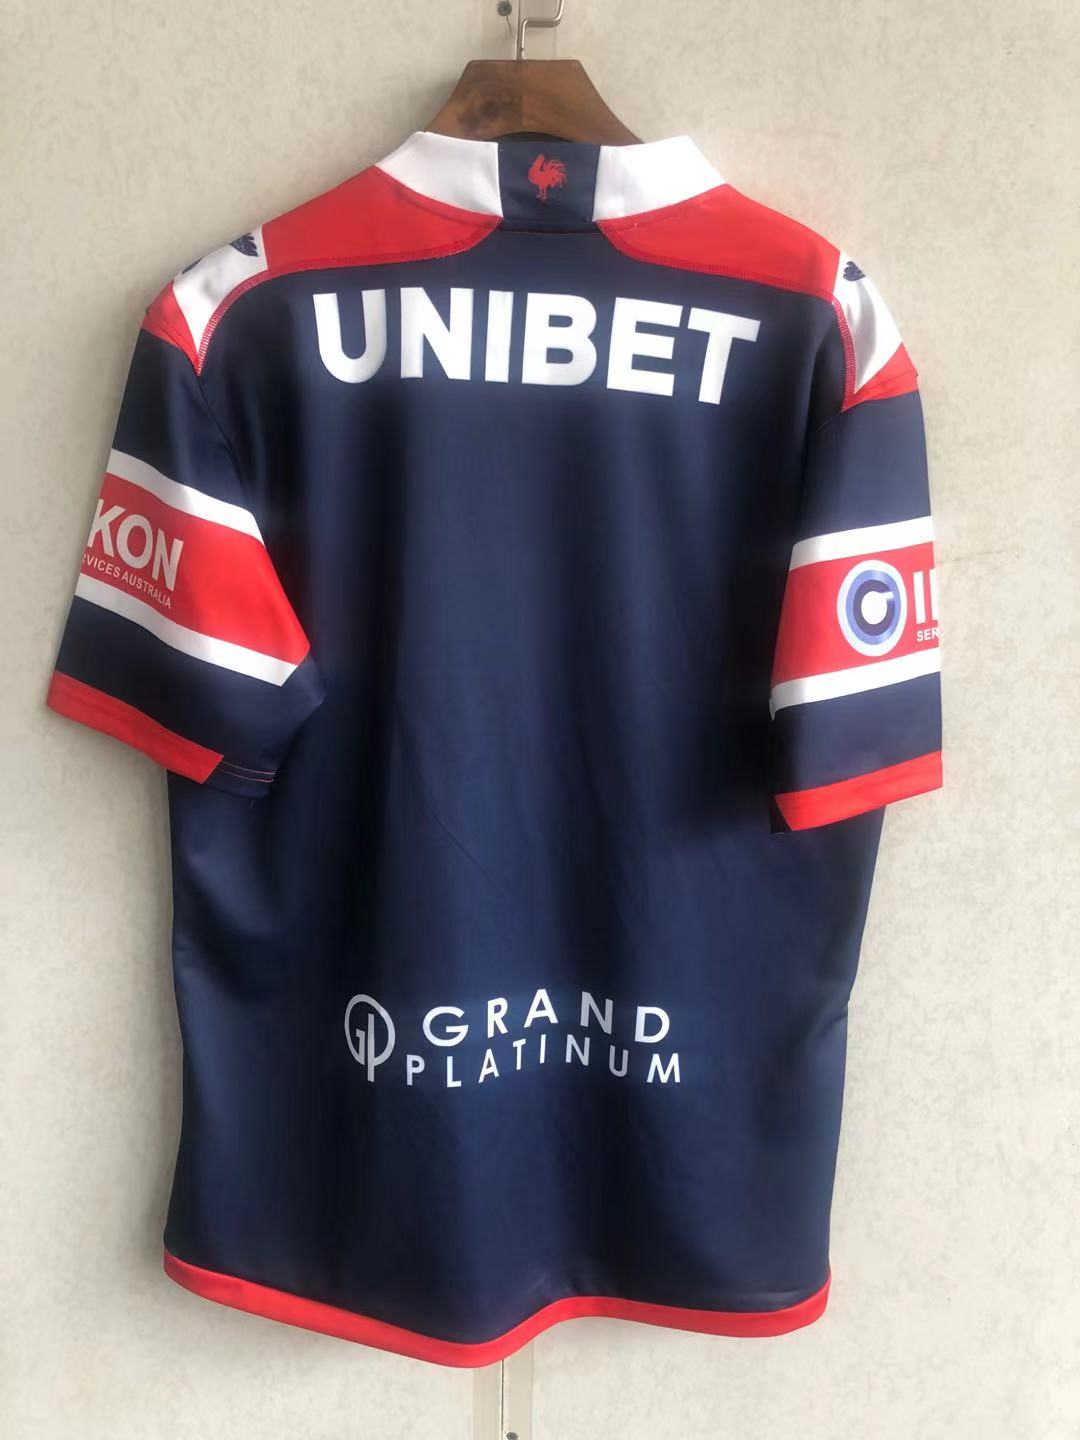 2021 Sydney Roosters Home Rugby Soccer Jersey Replica  Mens